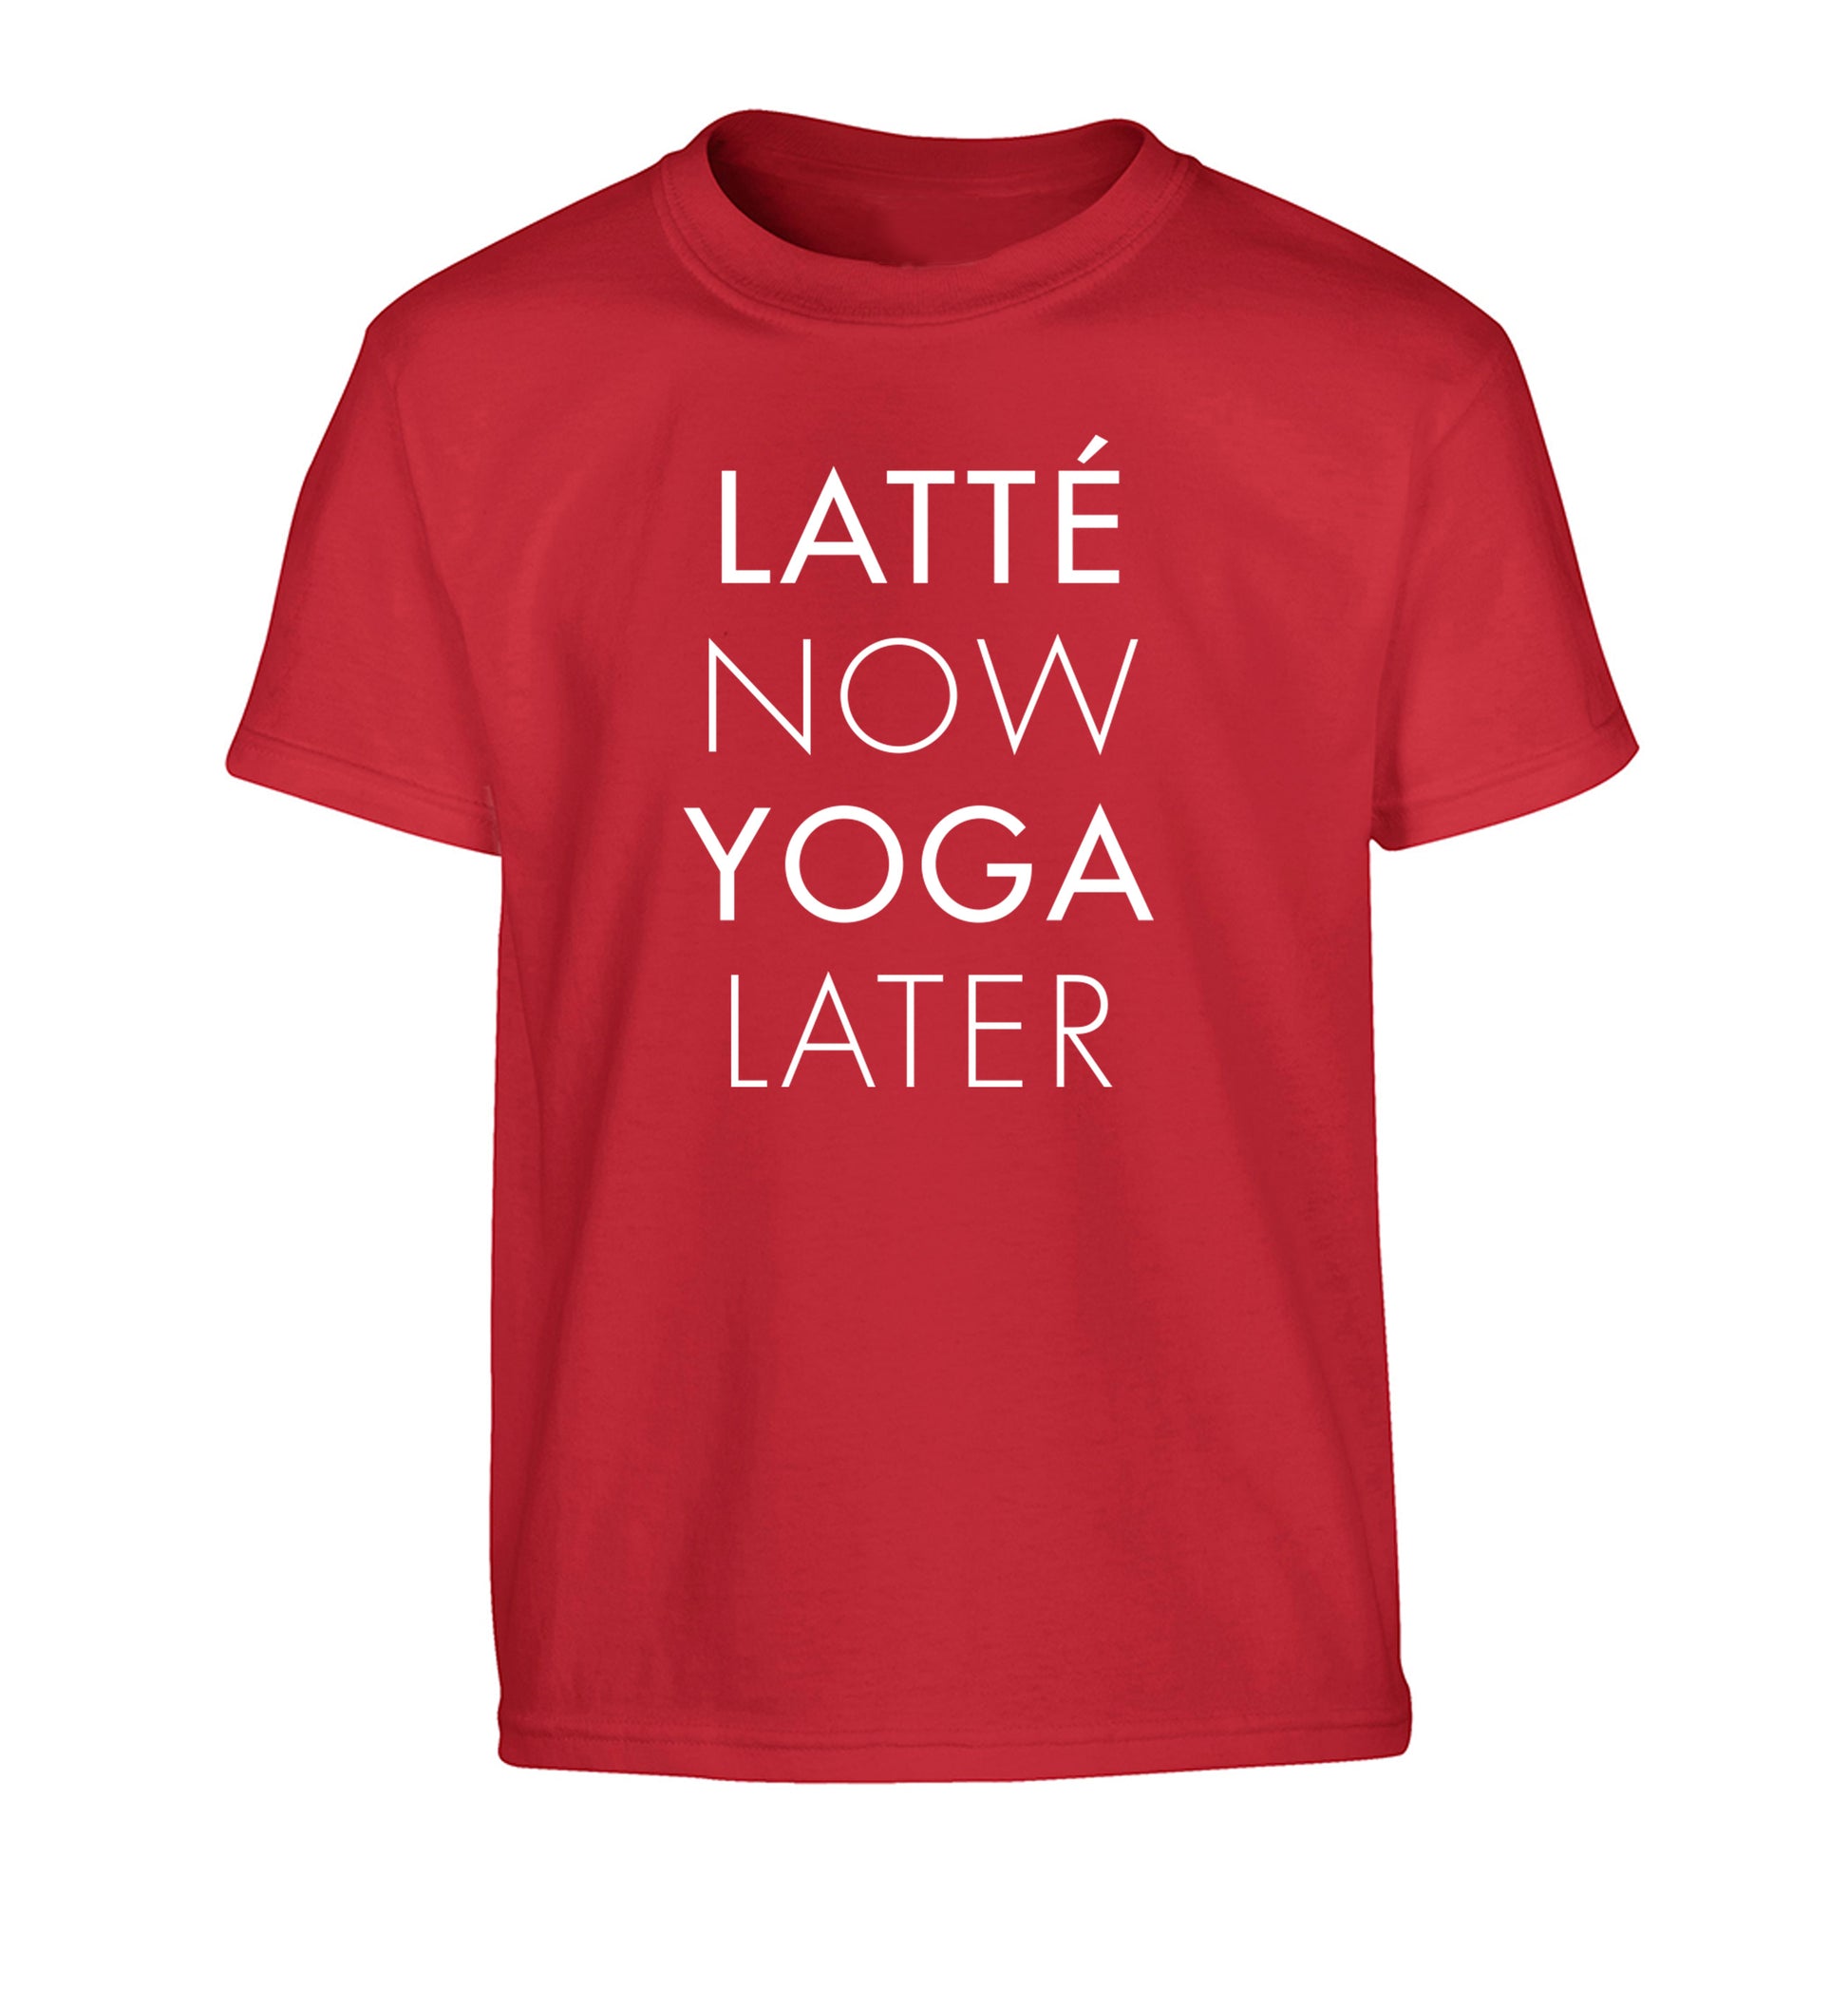 Latte now yoga later Children's red Tshirt 12-14 Years